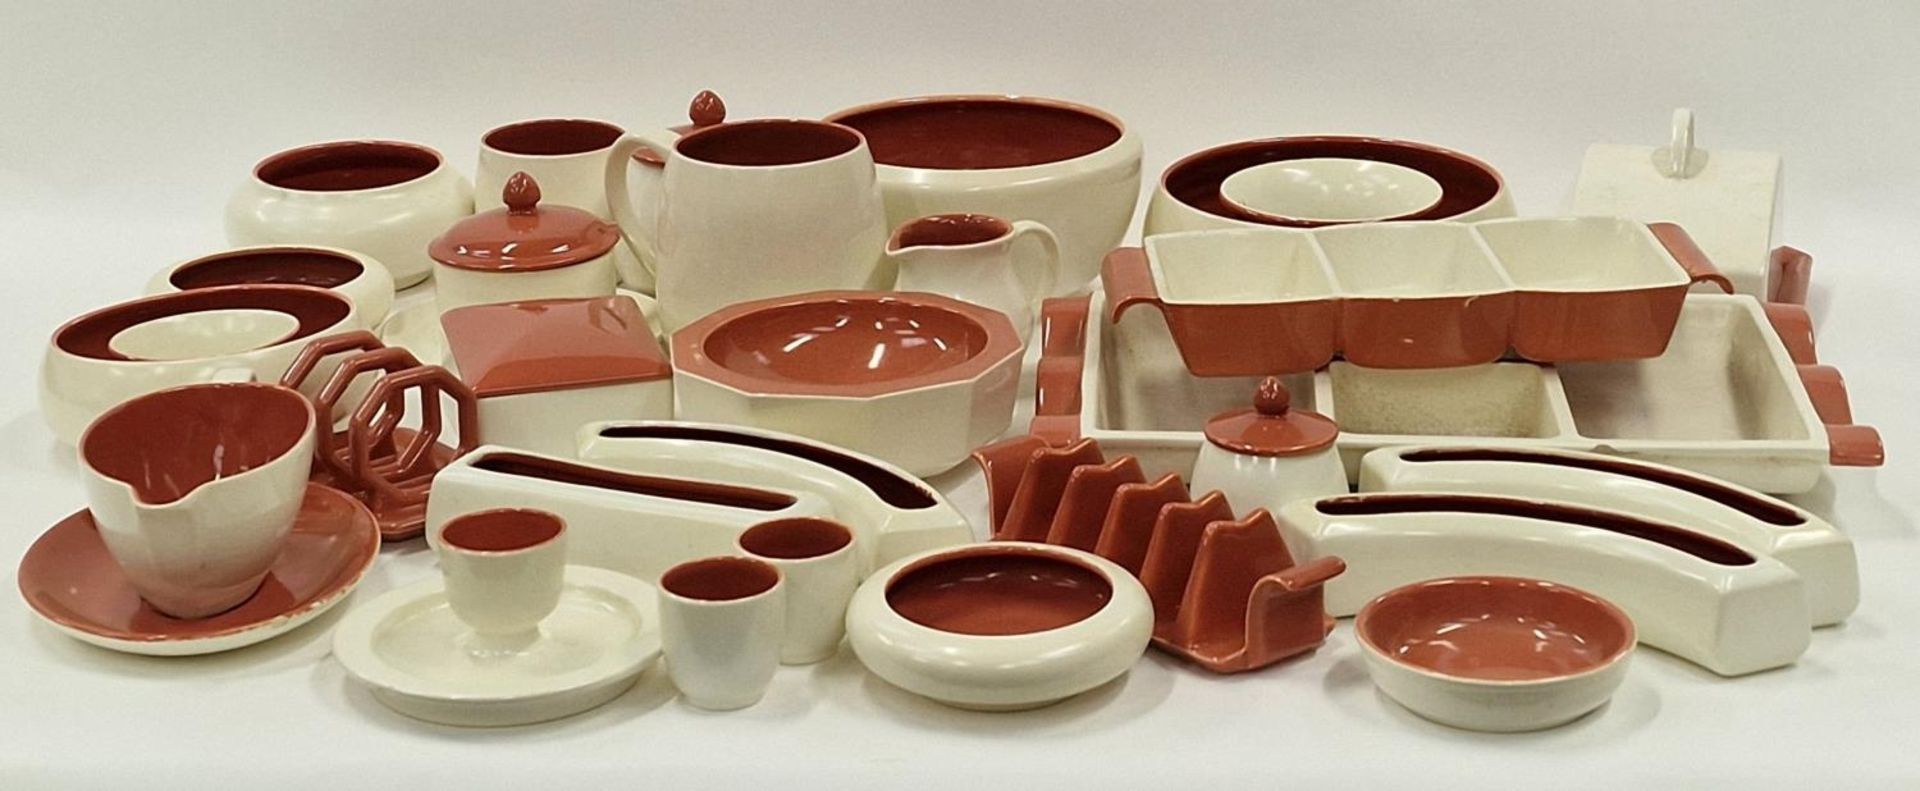 Poole Pottery Twintone collection in the rarer "Red Indian" colourway to include dinnerware, egg